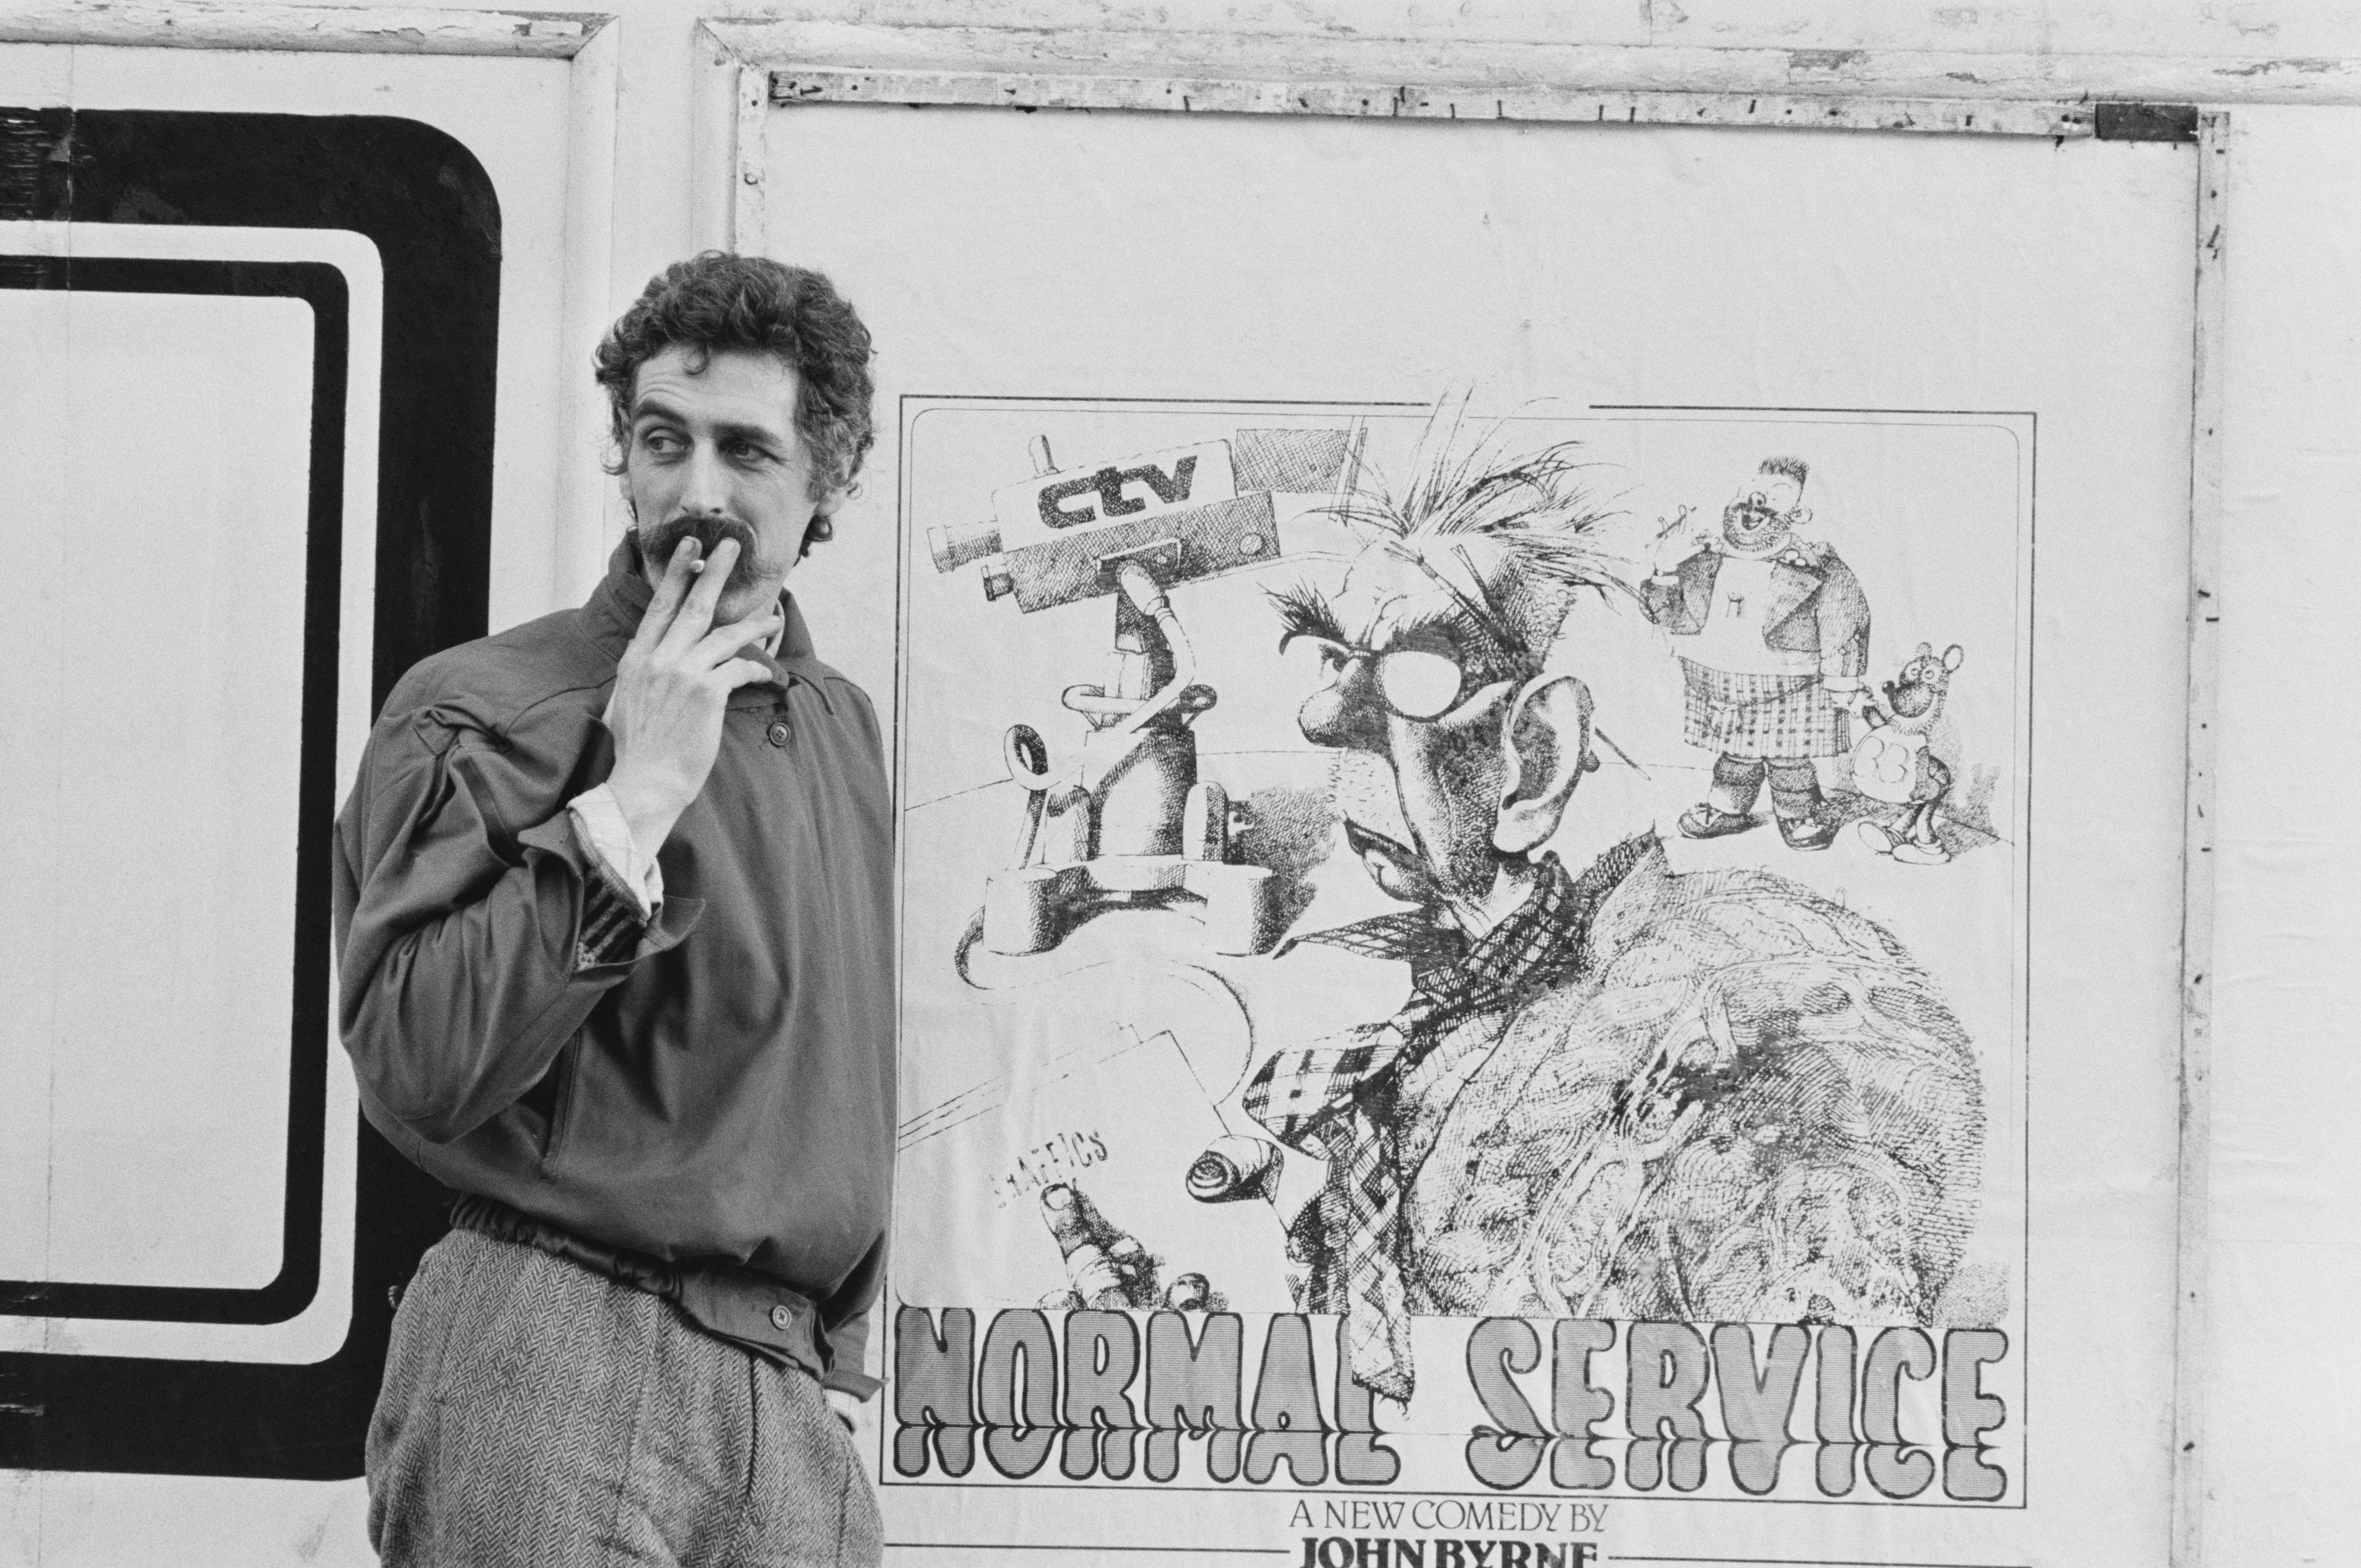 Scottish playwright and artist John Byrne near a poster promoting his comedy 'Normal Service', UK, March 9, 1979.